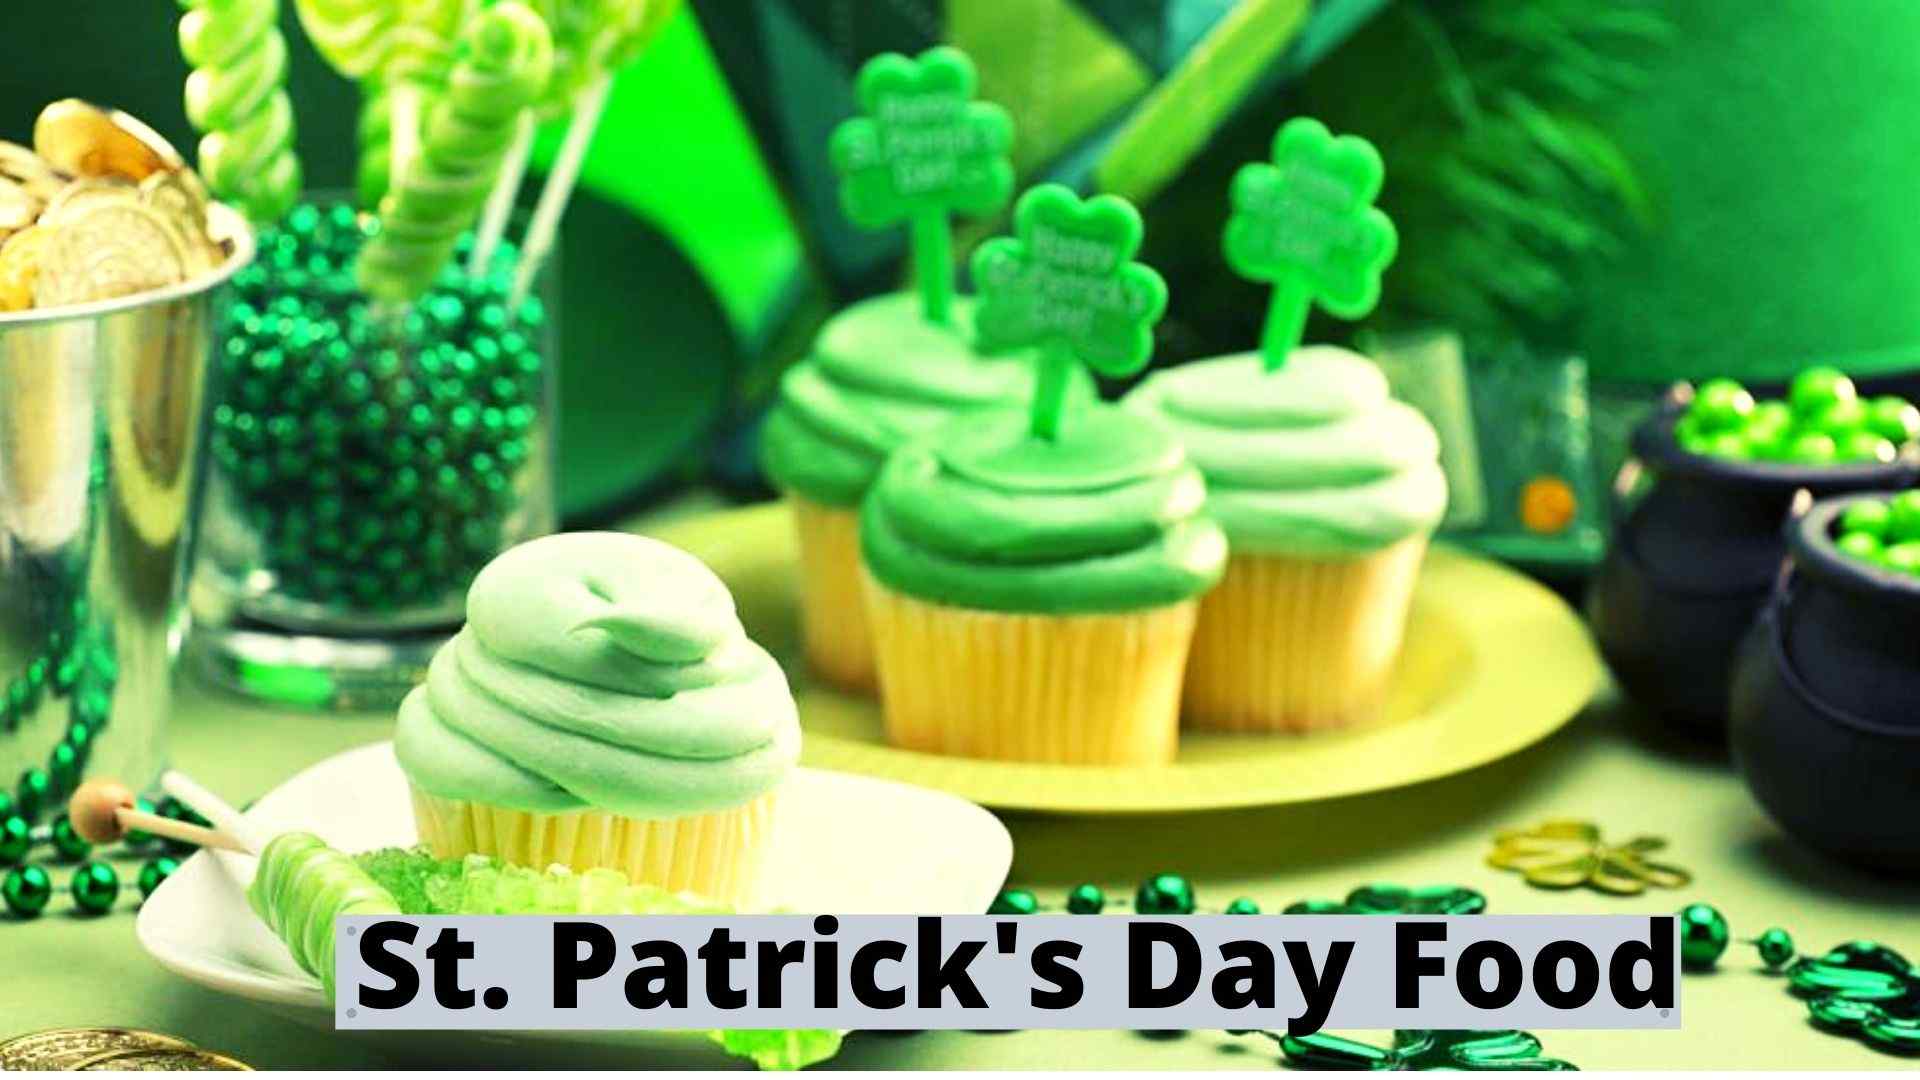 St. Patrick's Day Food Images